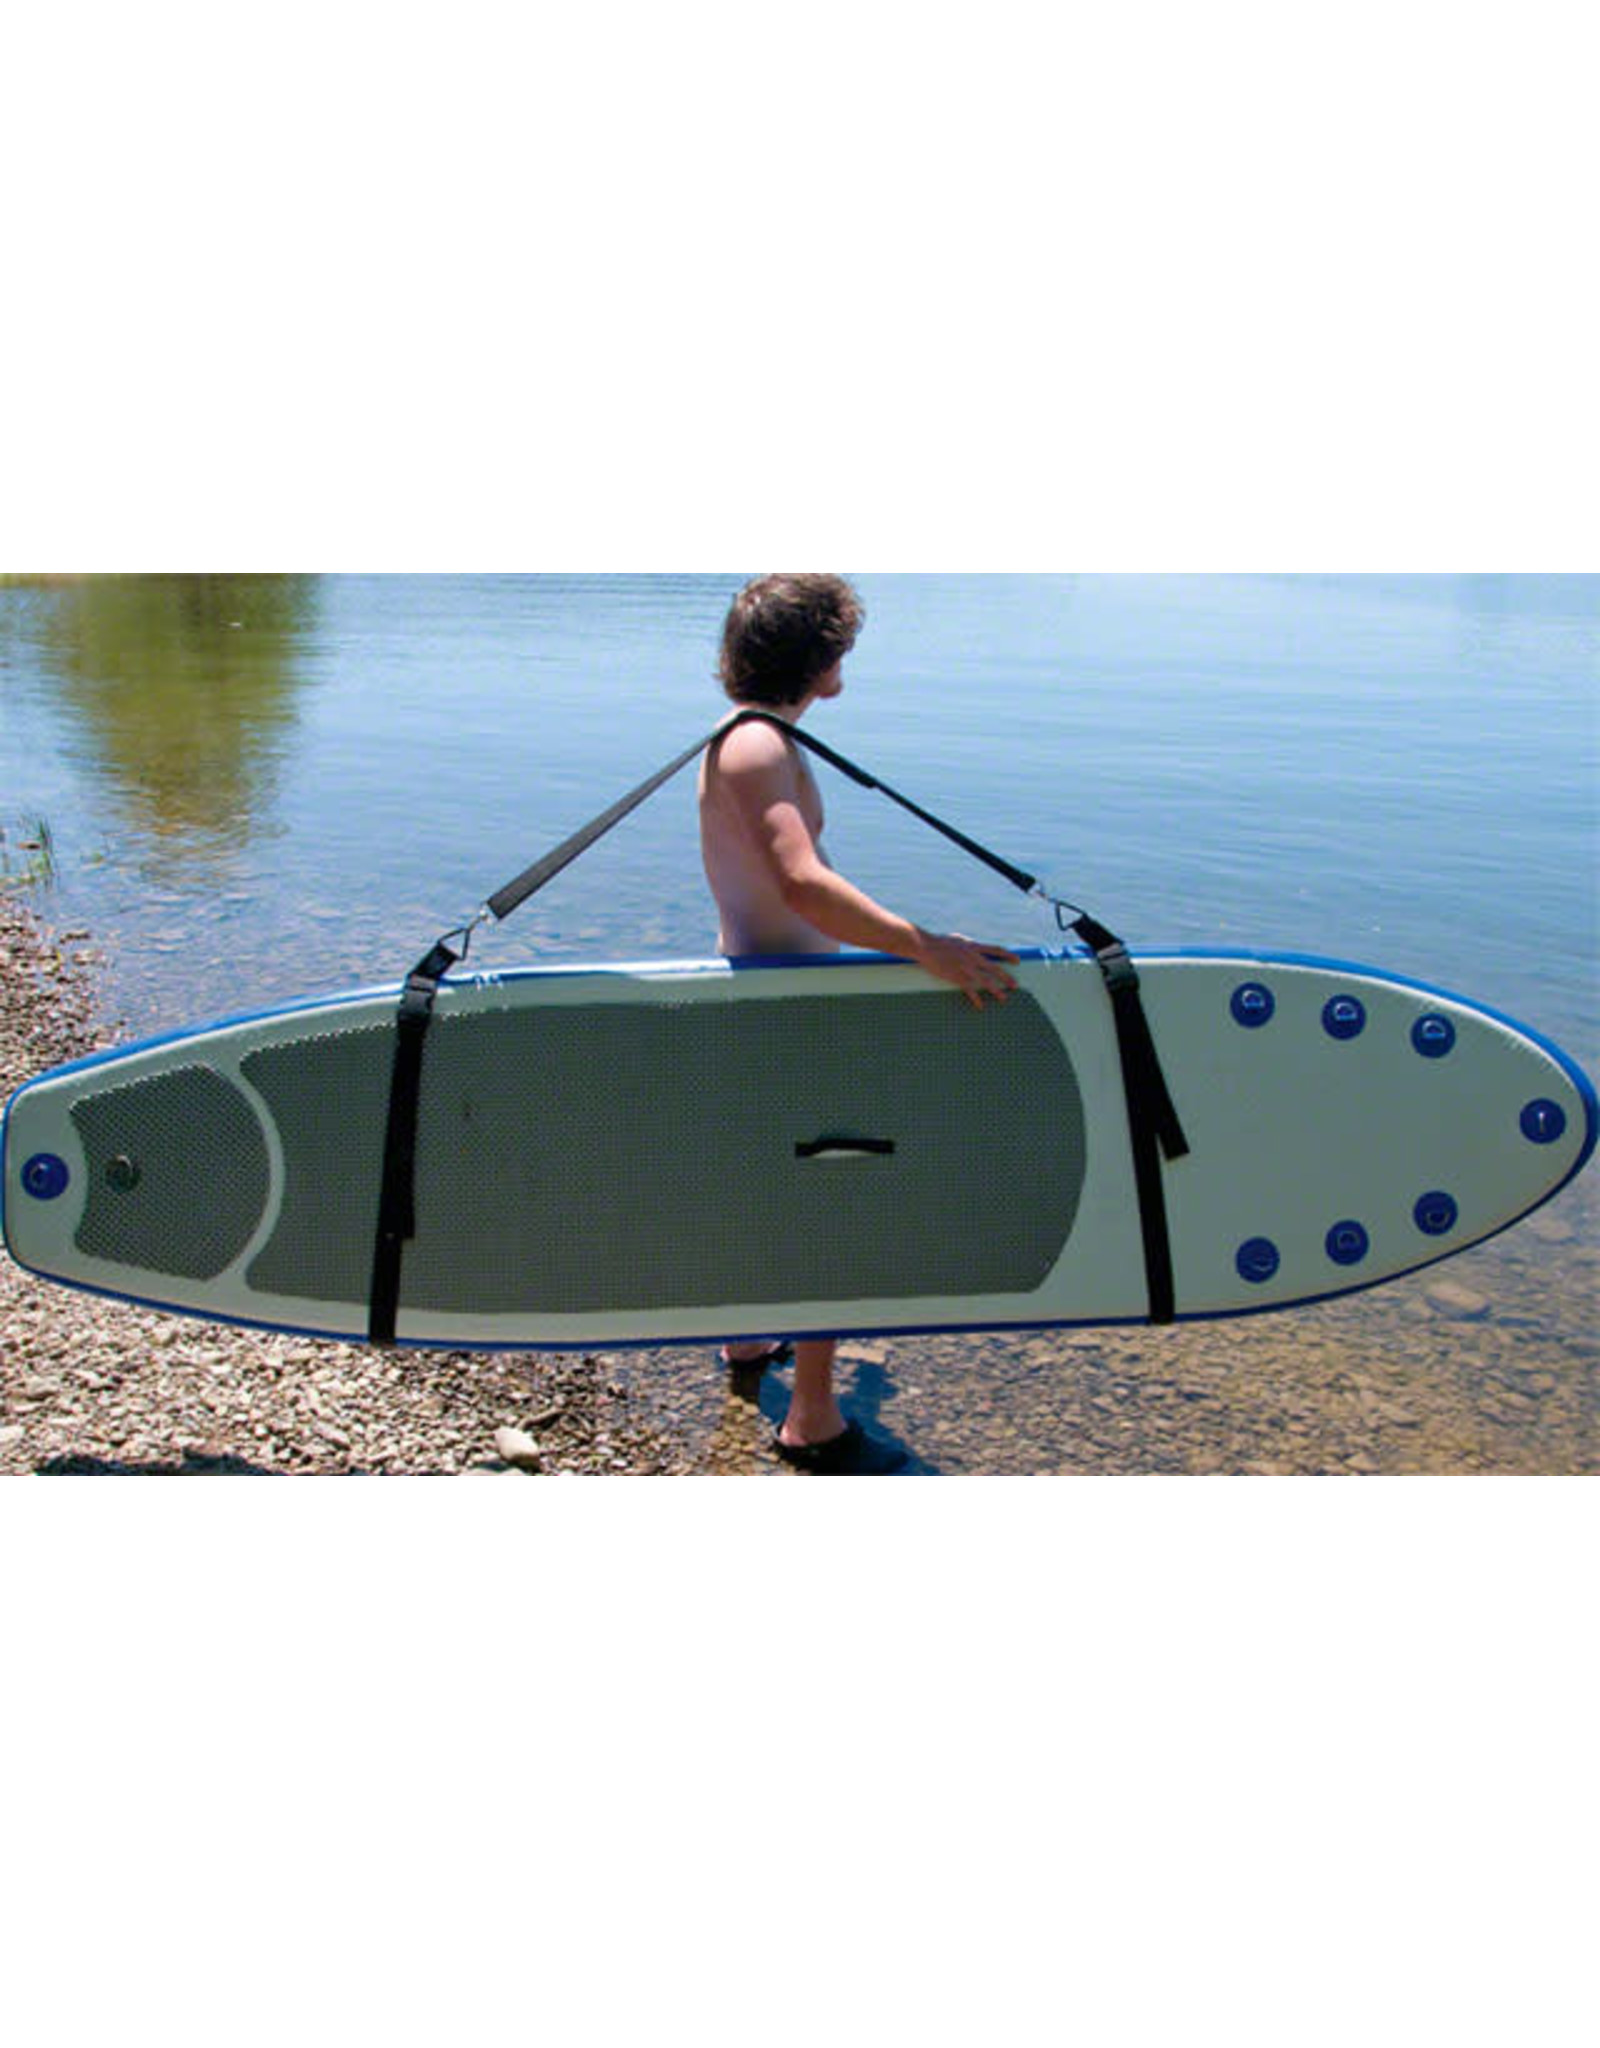 Seattle Sports Company SUP Strap Carry System